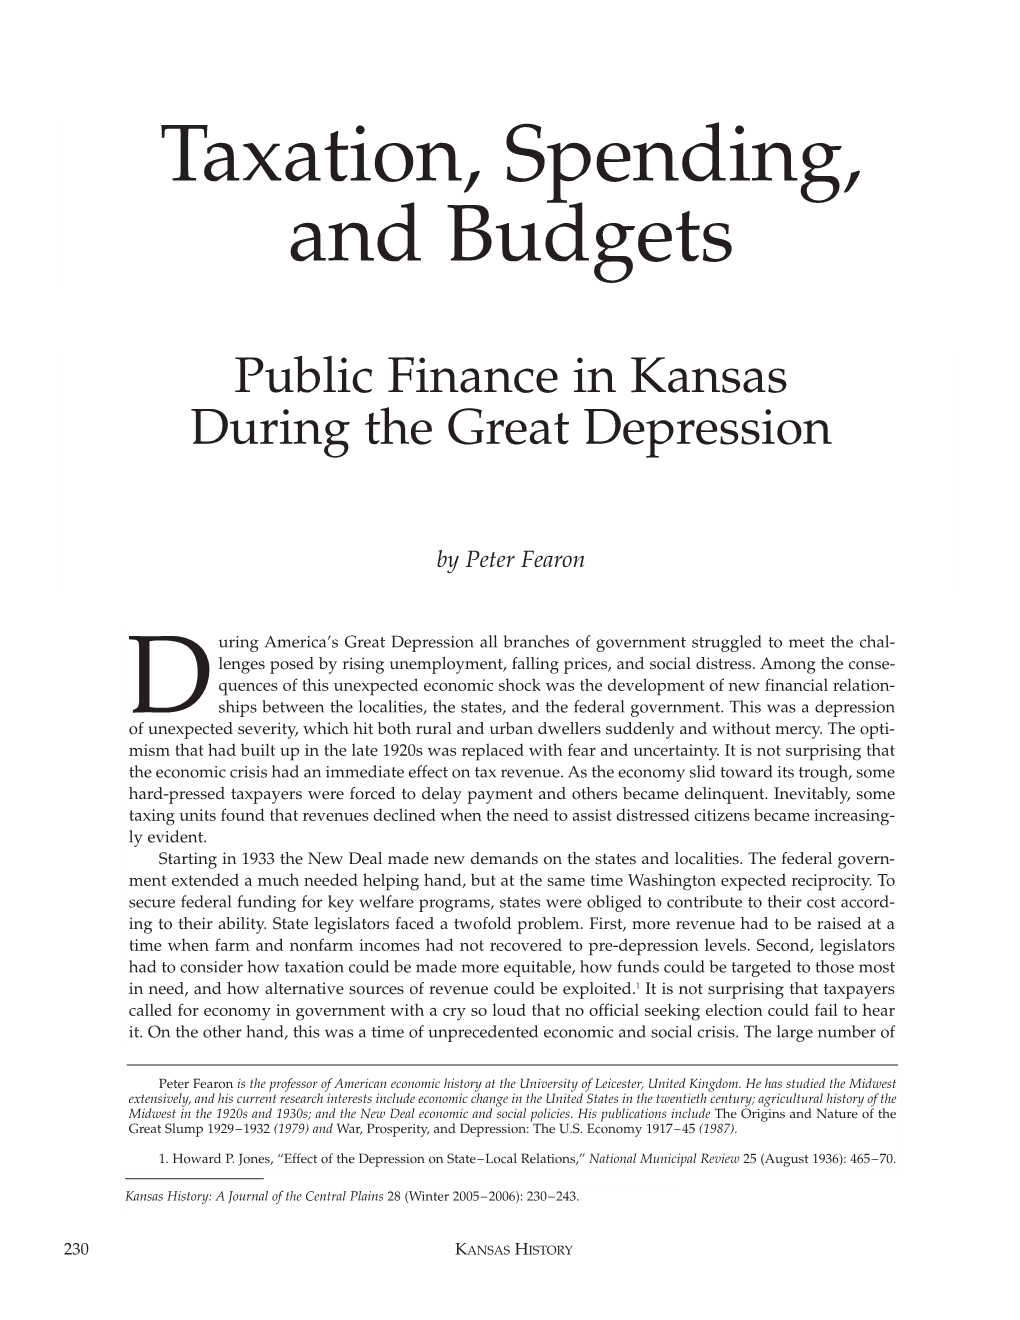 Taxation, Spending, and Budgets